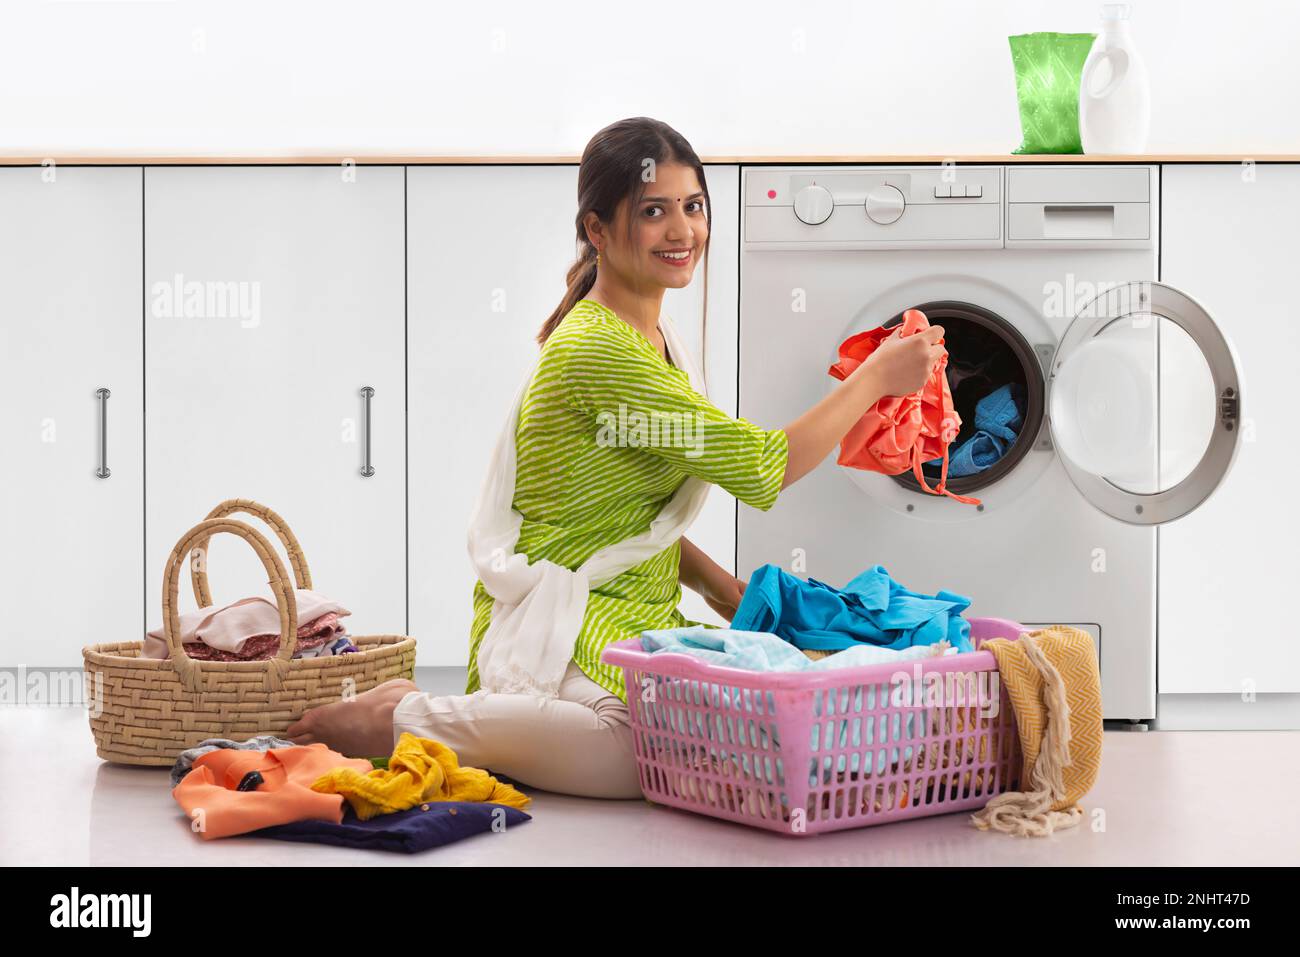 Portrait of young woman doing laundry Stock Photo